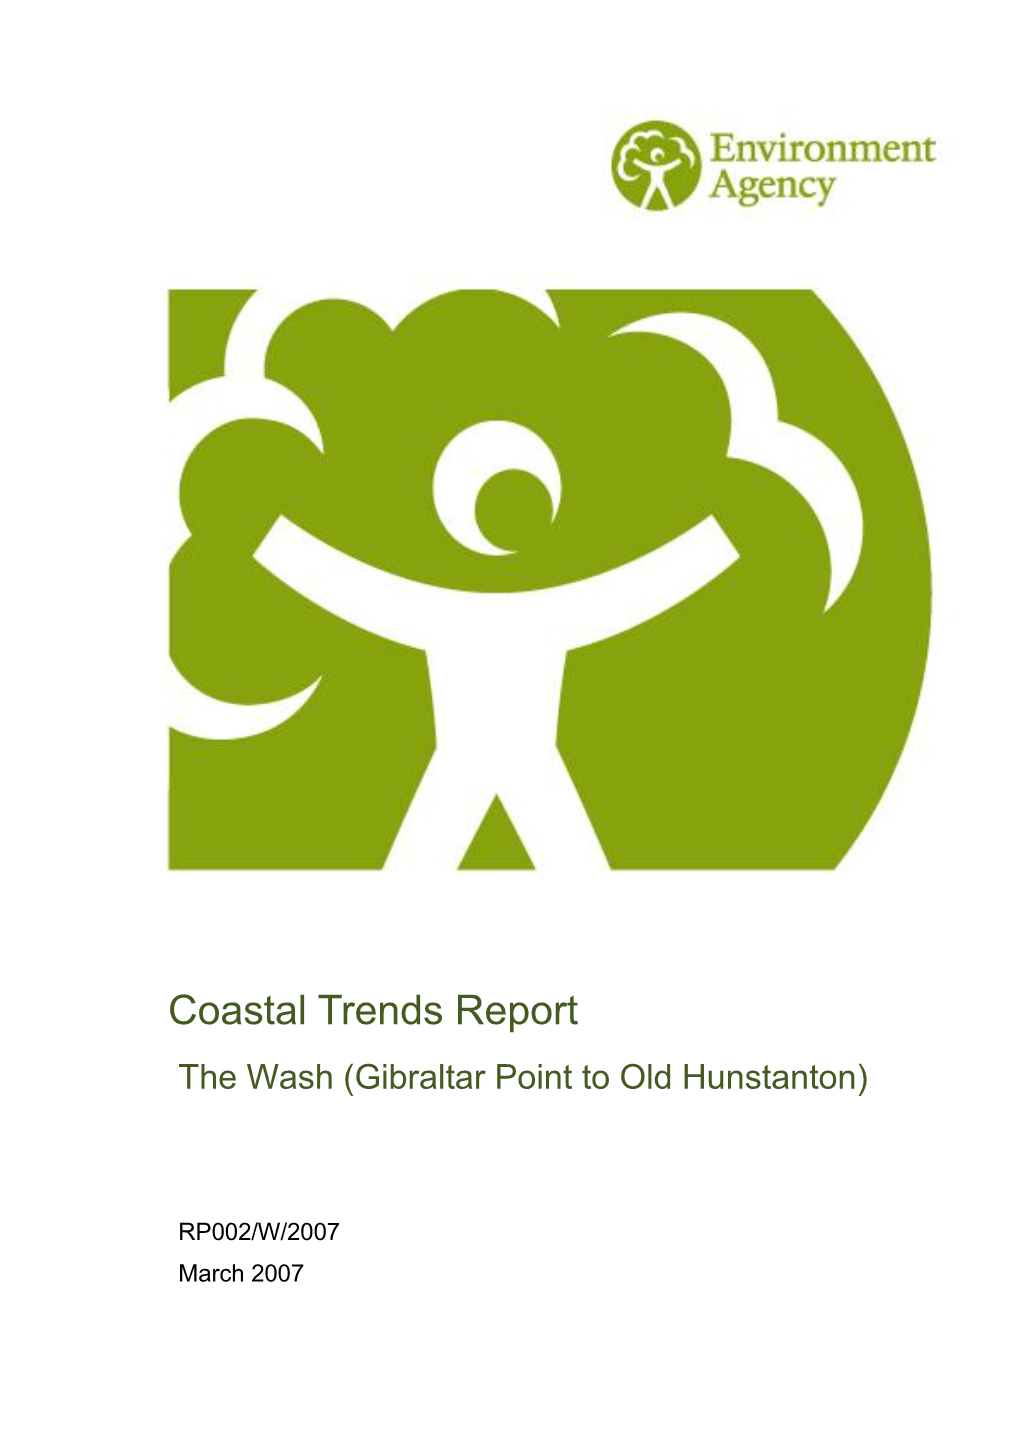 Coastal Trends Report, the Wash, 2007